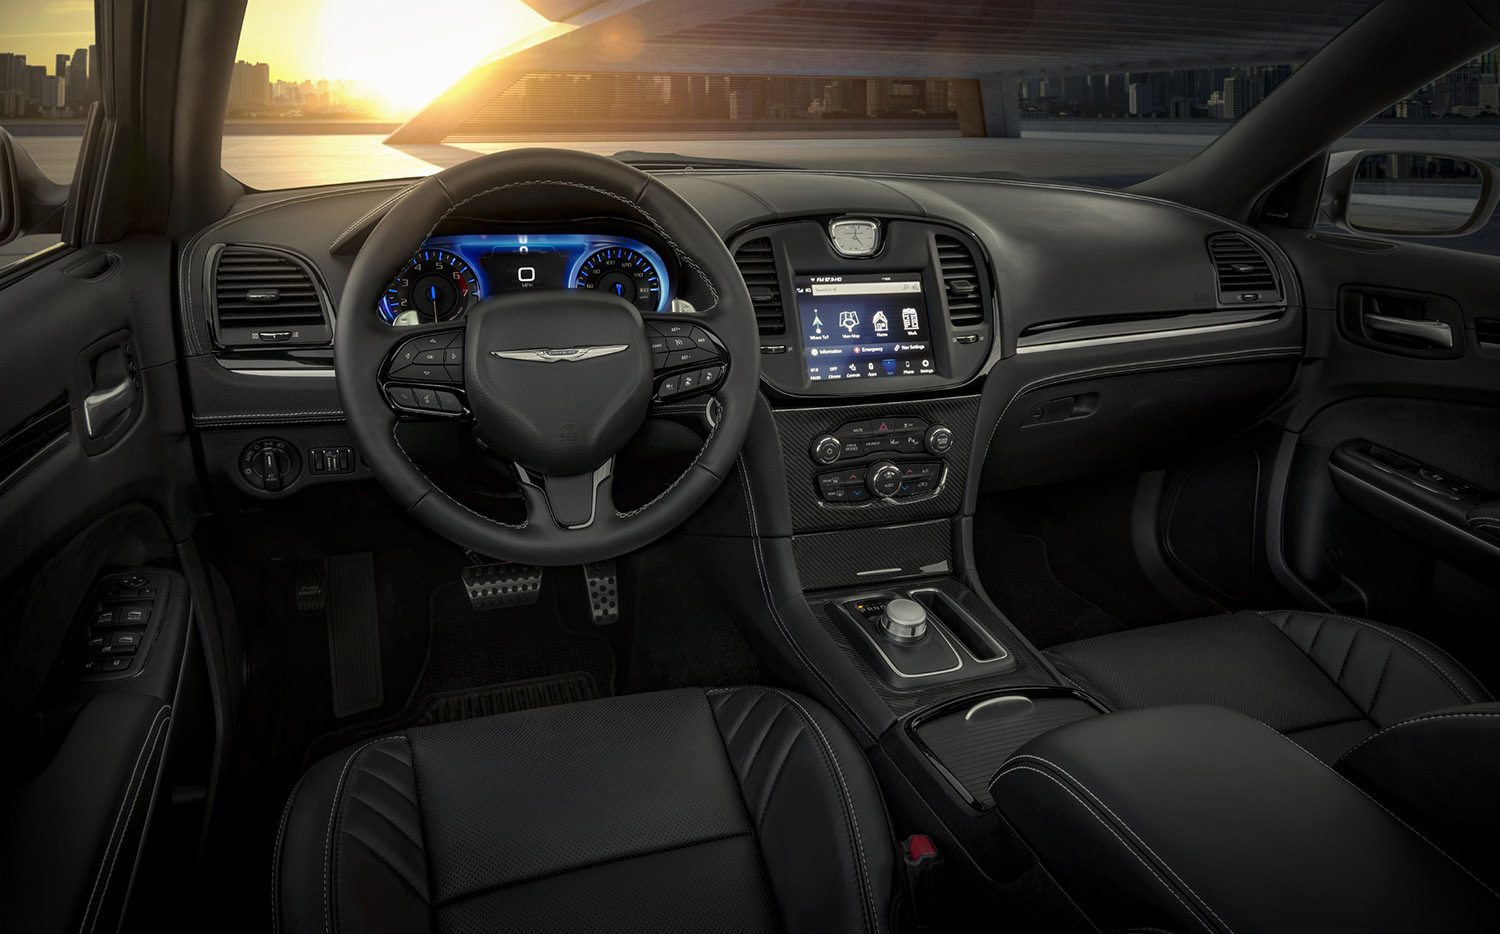 The interior of the 2023 Chrysler 300C features silver stitching that reaches the doors, console, seats and leather instrument panel, with carbon fiber and Piano Black touches on the interior bezels.